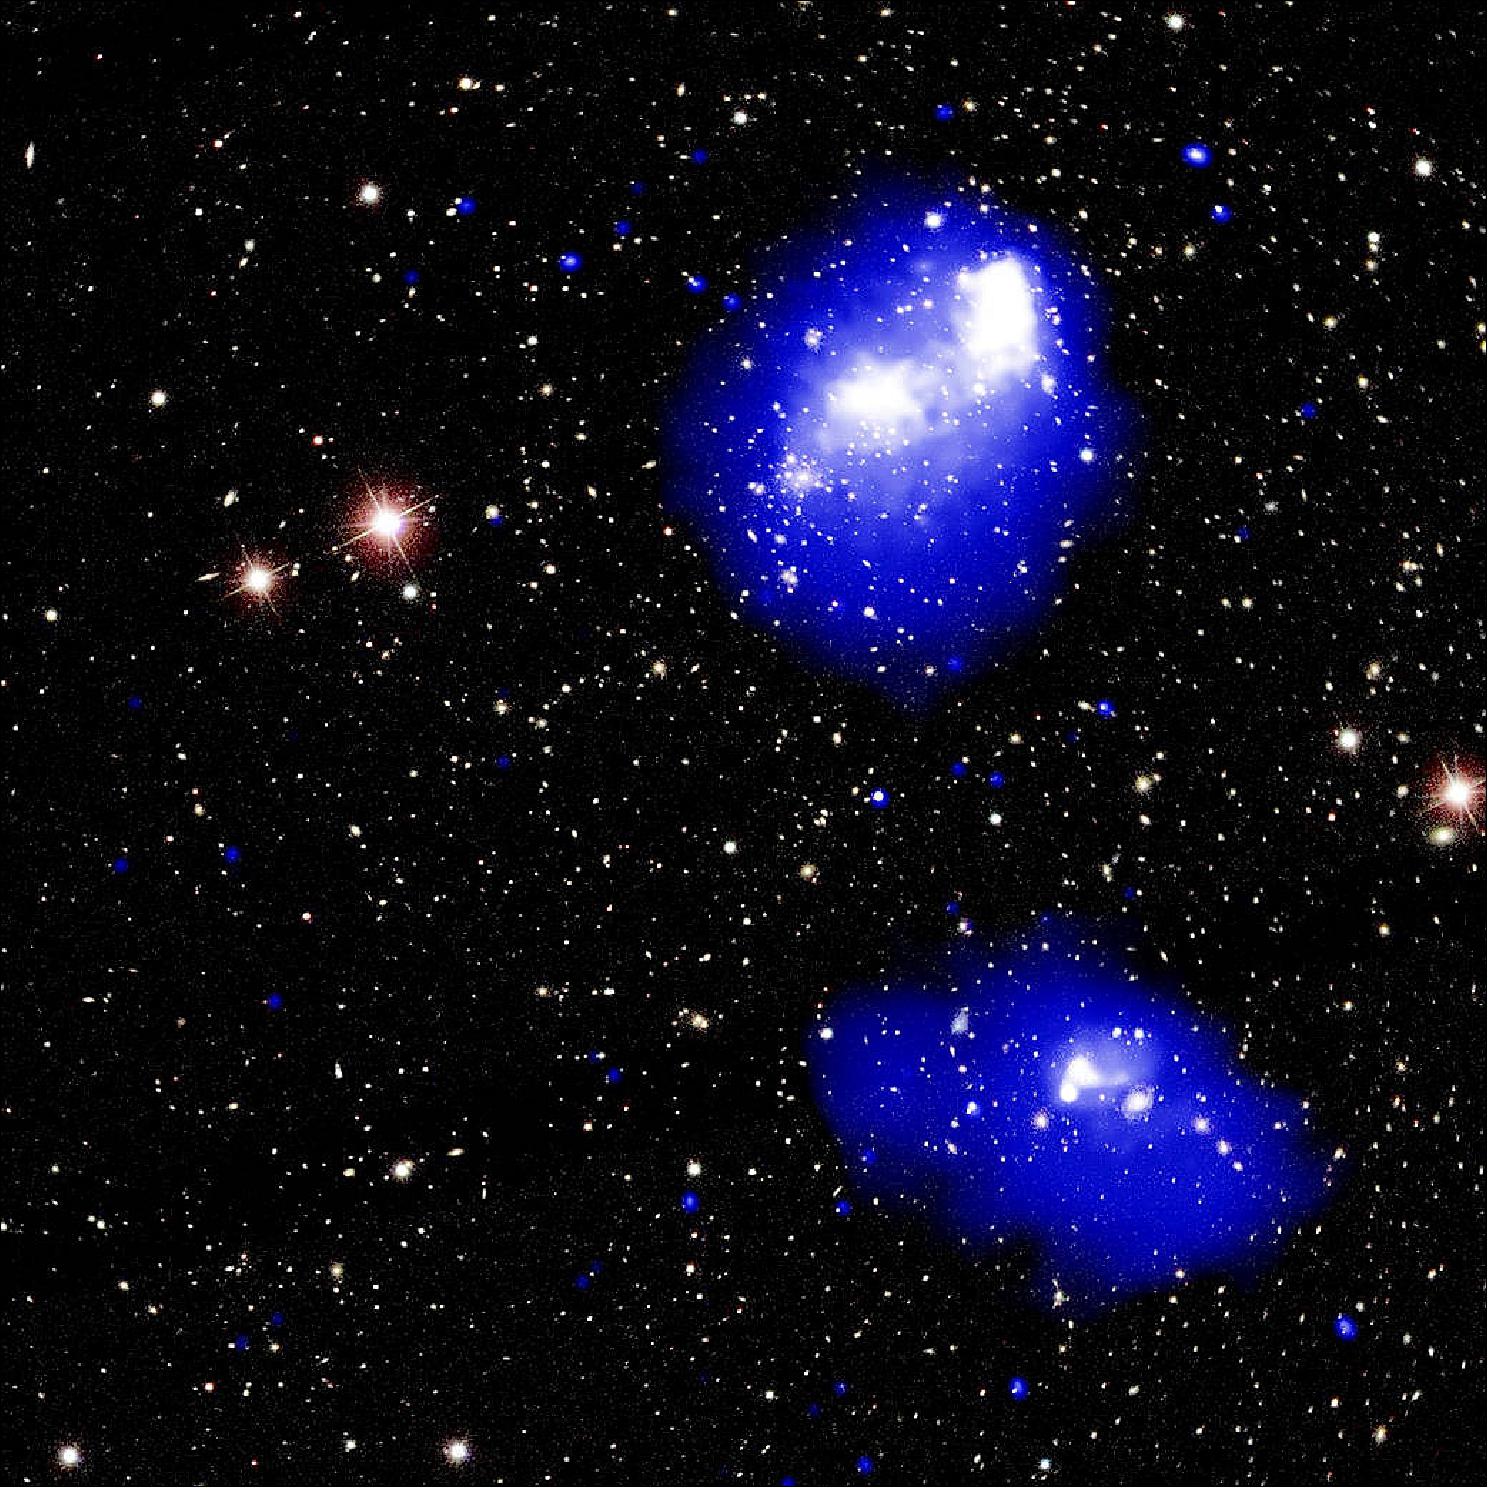 Figure 30: Each pair in the system contains two galaxy clusters that are well on their way to merging. In the northern (top) pair seen in the composite image, the centers of each cluster have already passed by each other once, about 300 to 400 million years ago, and will eventually swing back around. The southern pair at the bottom of the image has two clusters that are close to approaching each other for the first time (image credit: X-ray: NASA/CXC/SAO/G. Schellenberger et al.; Optical:SDSS)